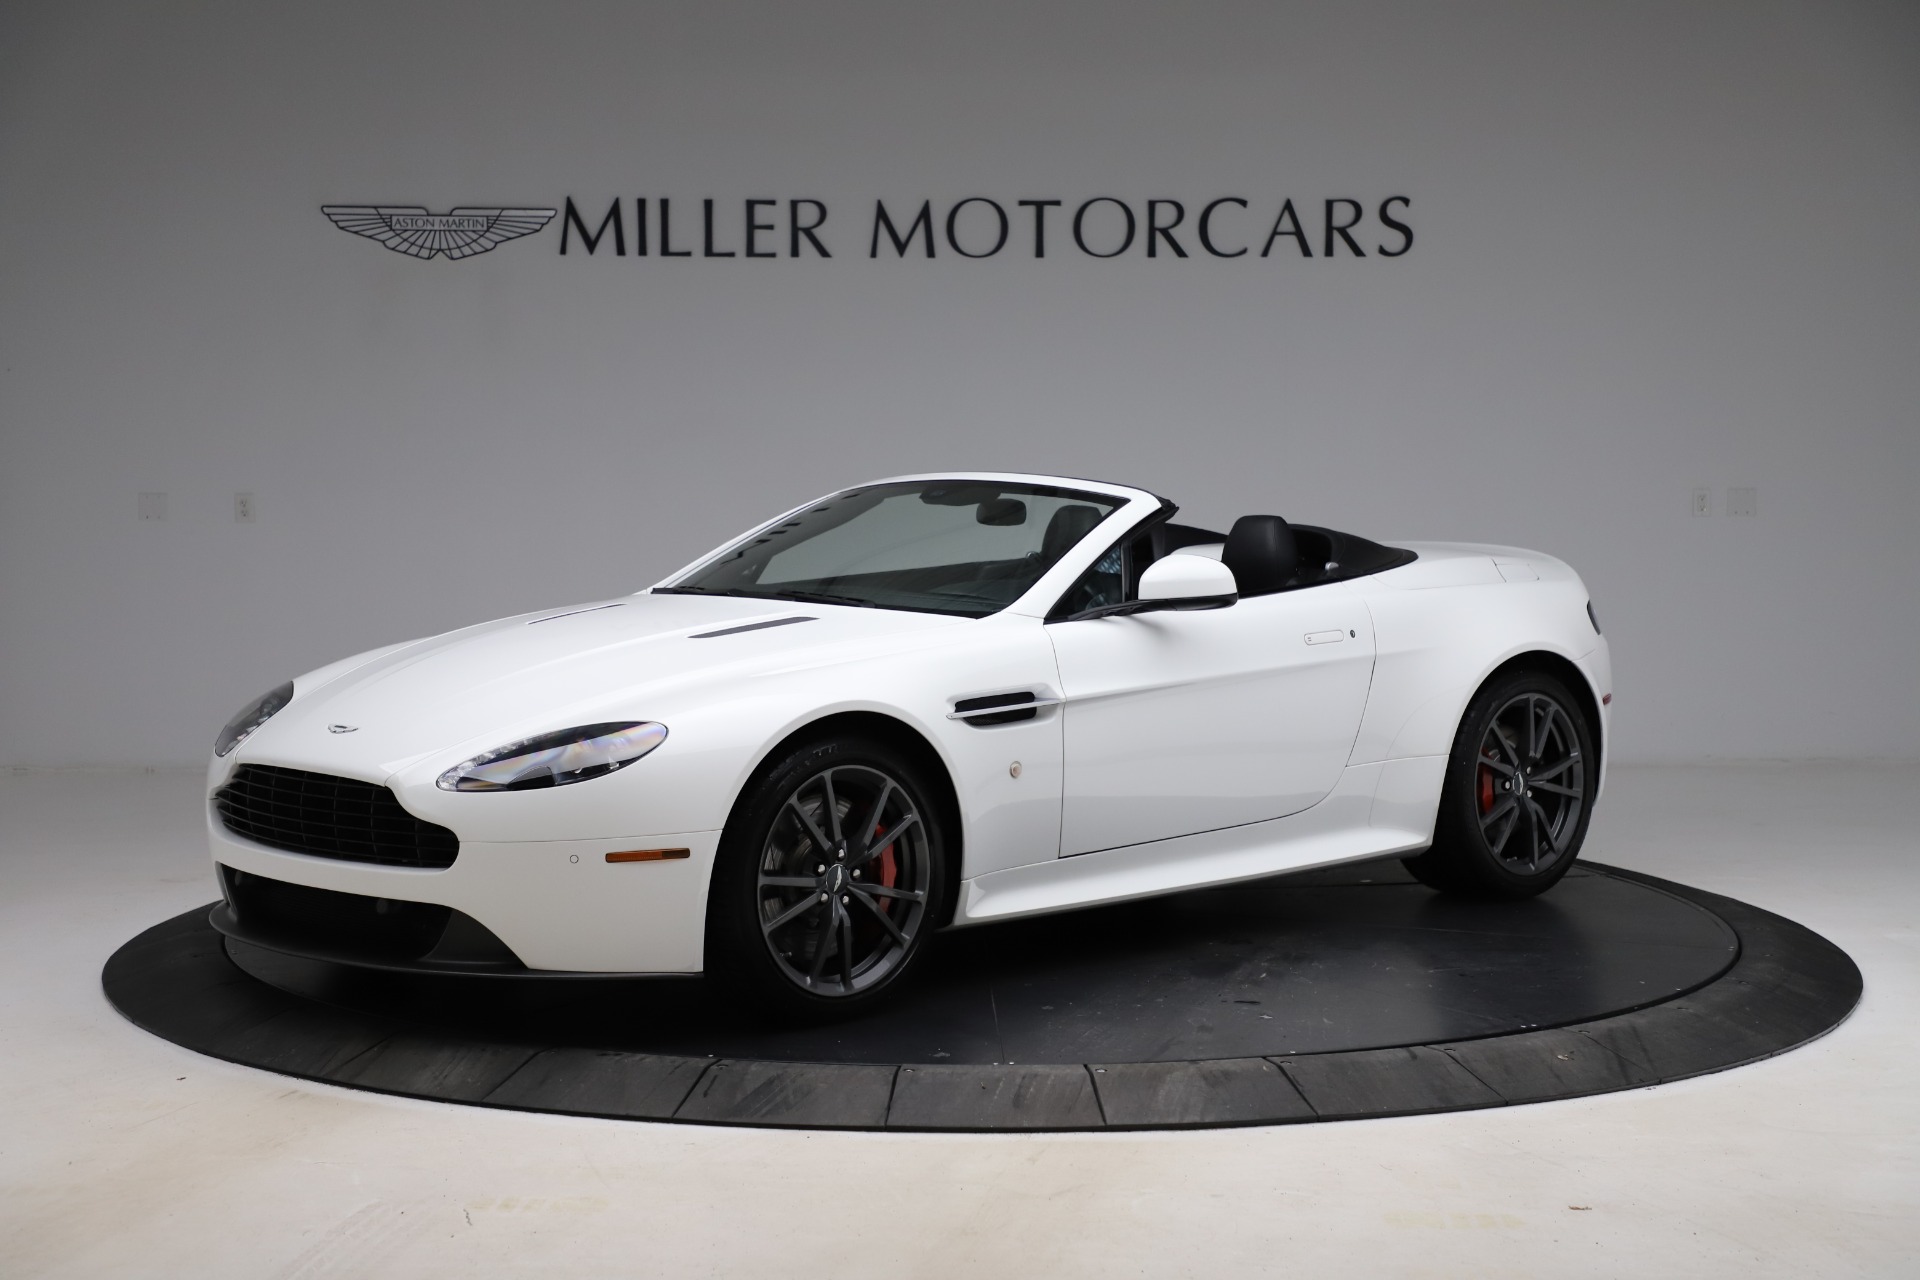 Used 2015 Aston Martin V8 Vantage GT Roadster for sale Sold at Bentley Greenwich in Greenwich CT 06830 1